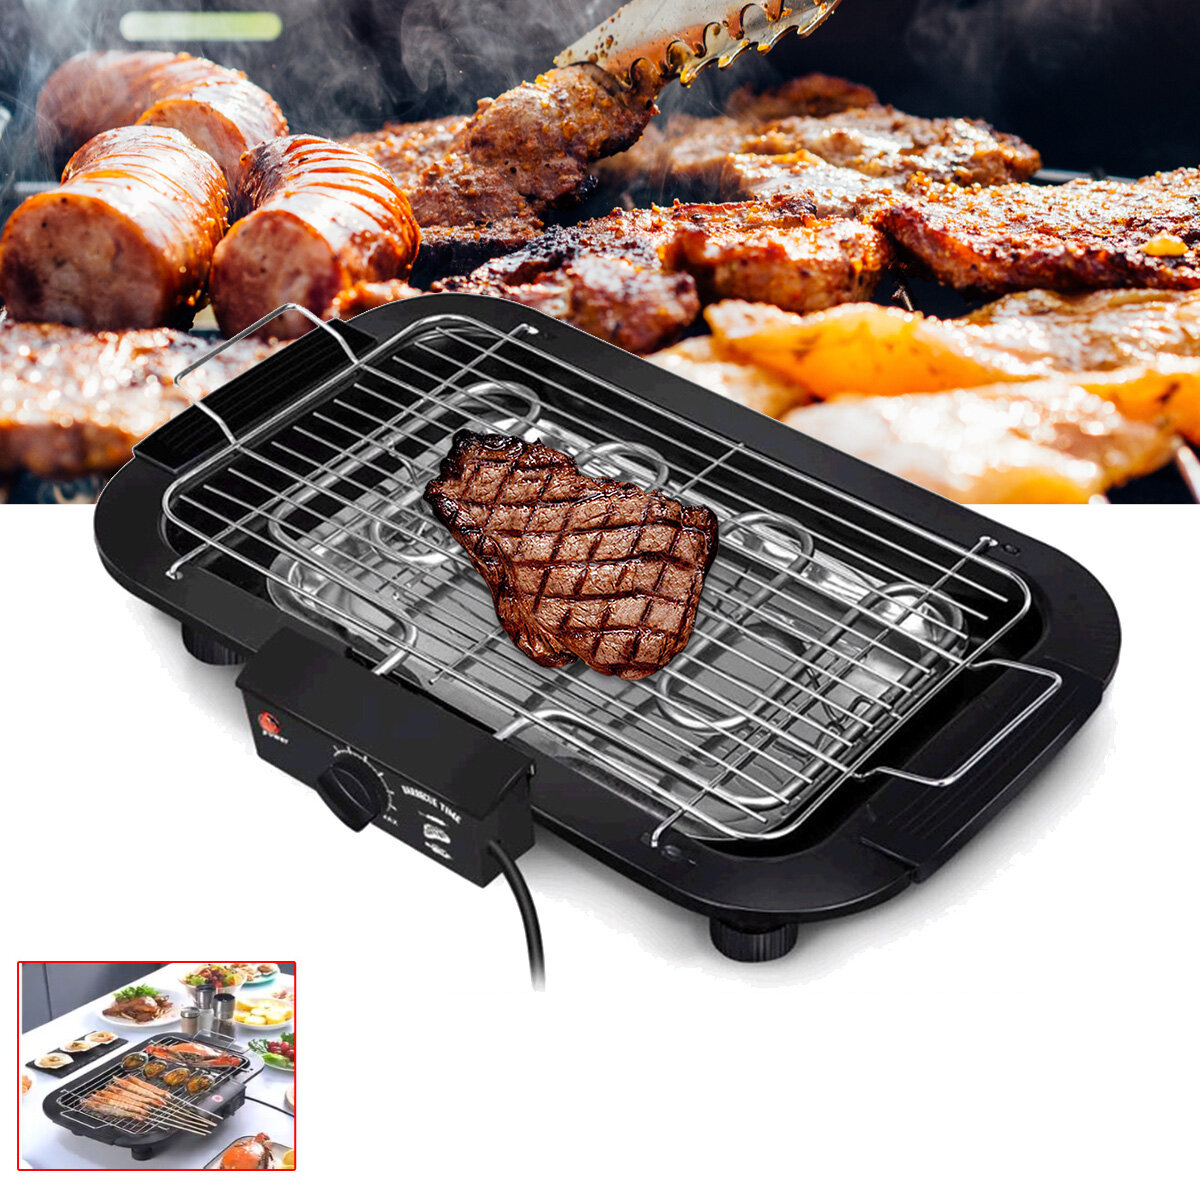 

220V Portable Electric Grill Smokeless Electric Pan Grill BBQ Griddle Mini Non-stick Plate Electric Home Barbecue Grill